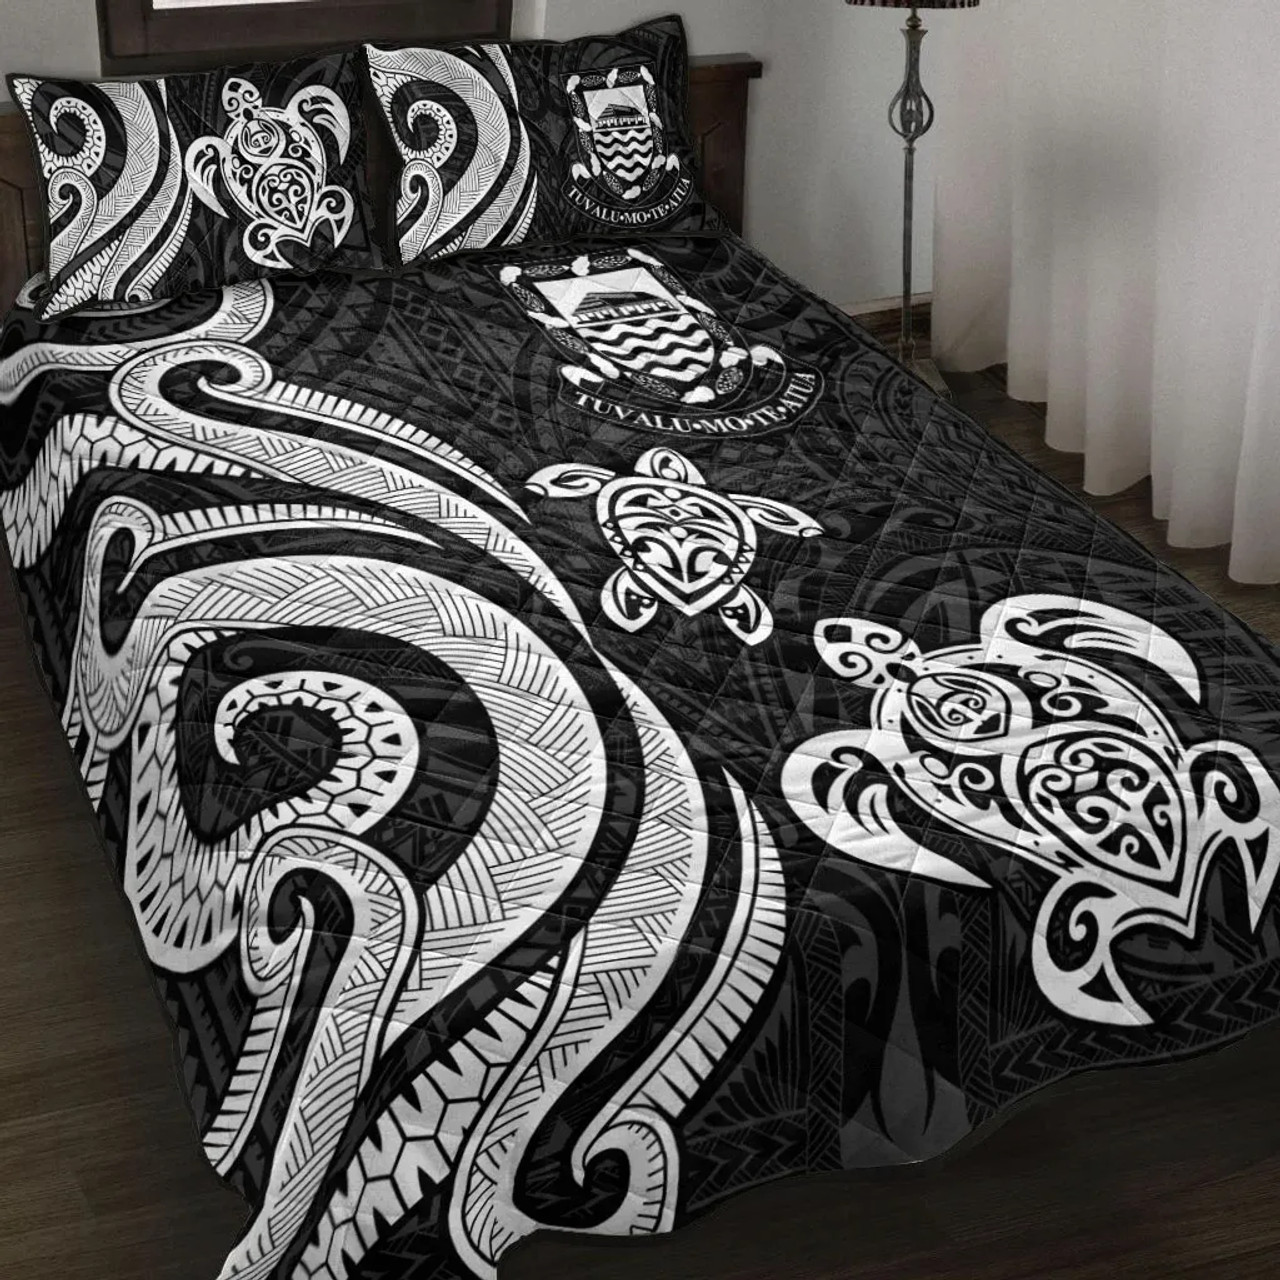 Tuvalu Quilt Bed Set - White Tentacle Turtle 1